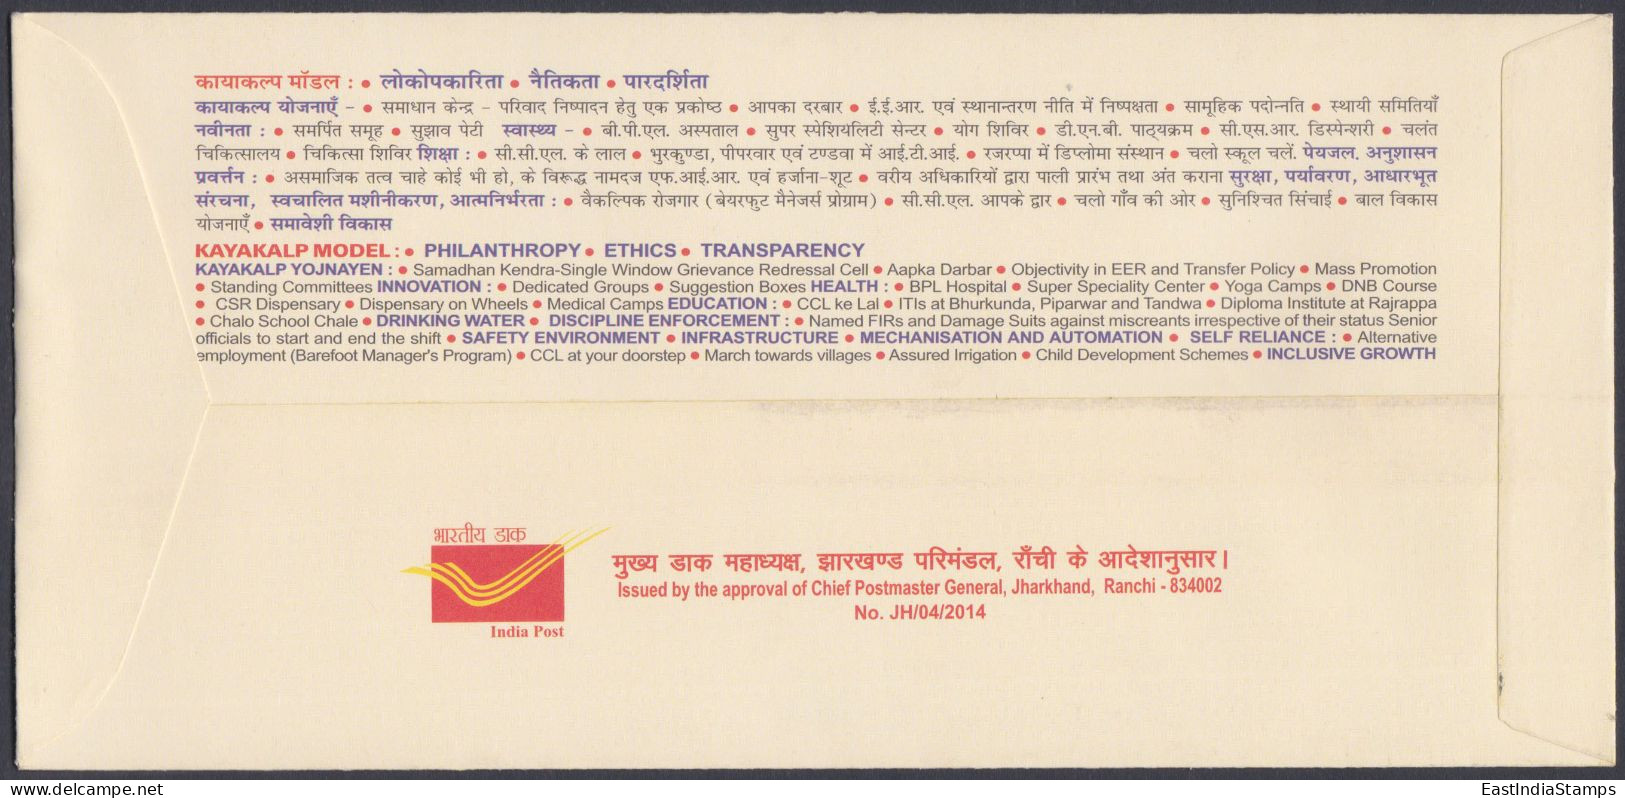 Inde India 2014 Special Cover Jharpex, Stamp Exhibition, Coal Mining, Mine, Fossil Fuel, Pictorial Postmark - Lettres & Documents